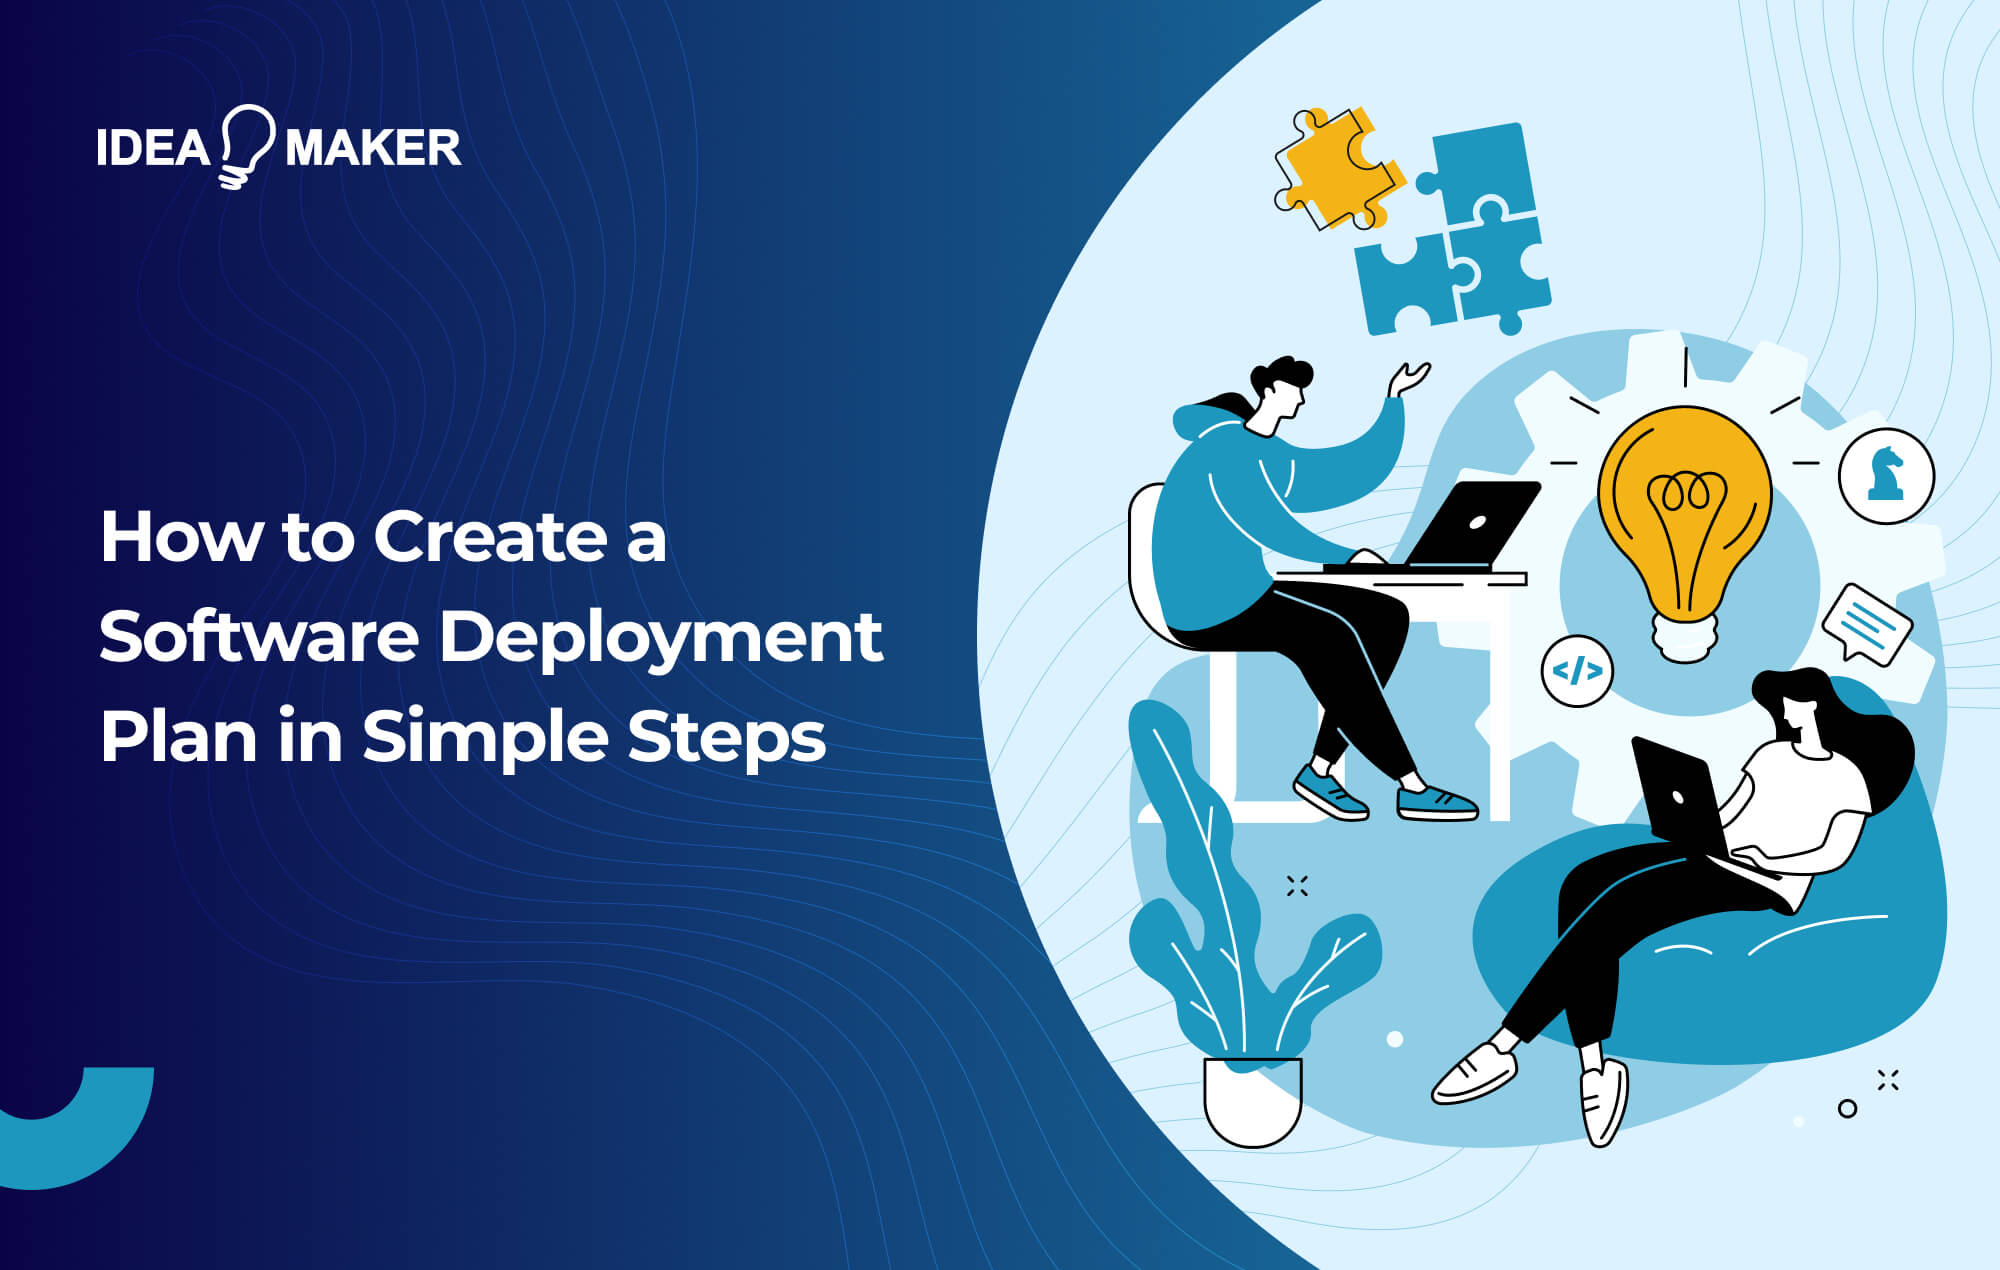 Ideamaker - How to Create a Software Deployment Plan in Simple Steps